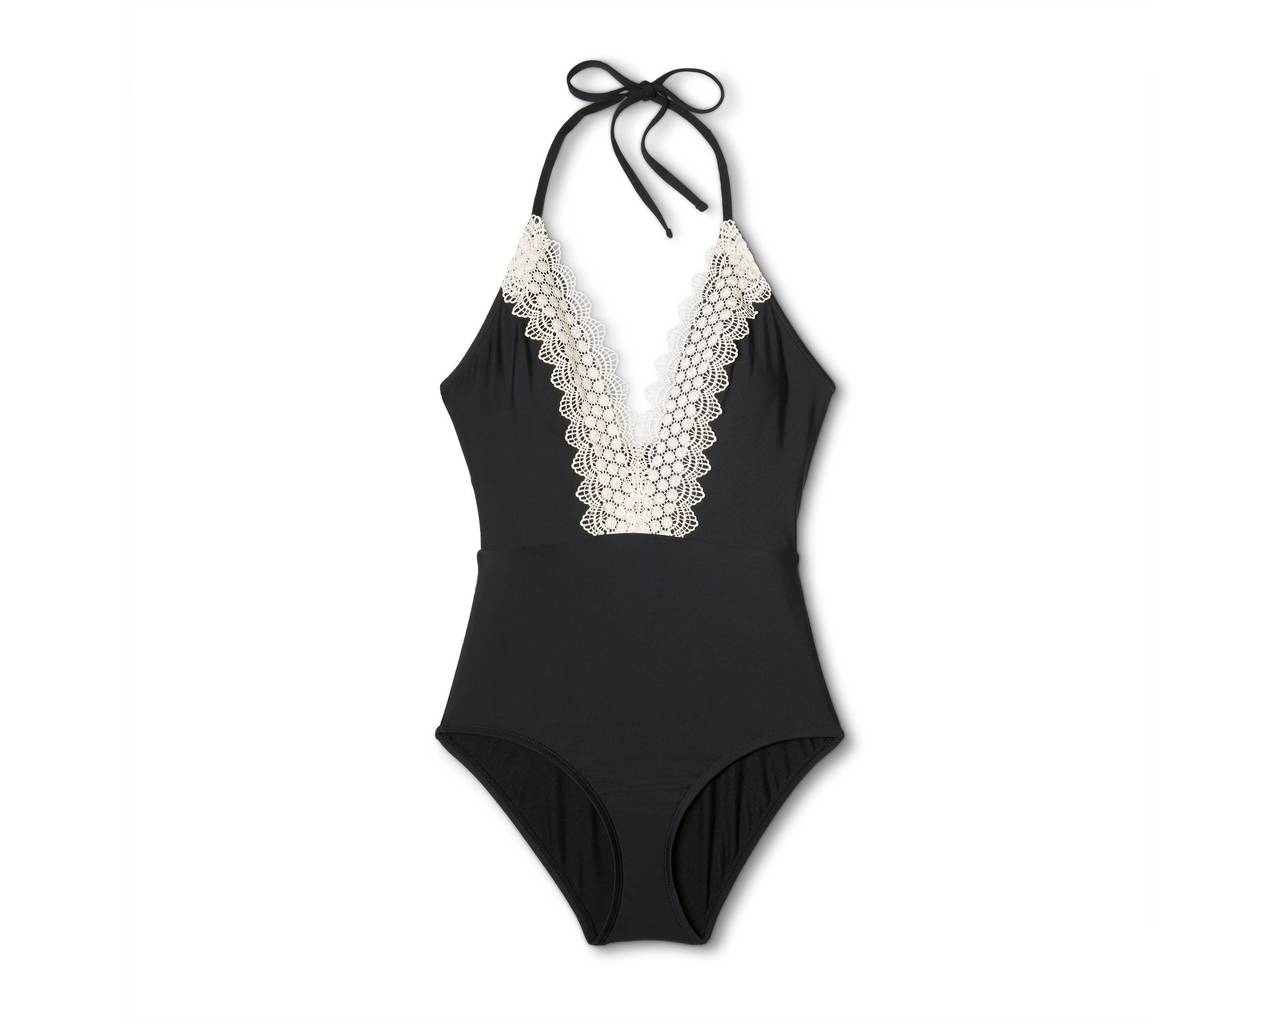 Women's one-piece bathing suit from Target.